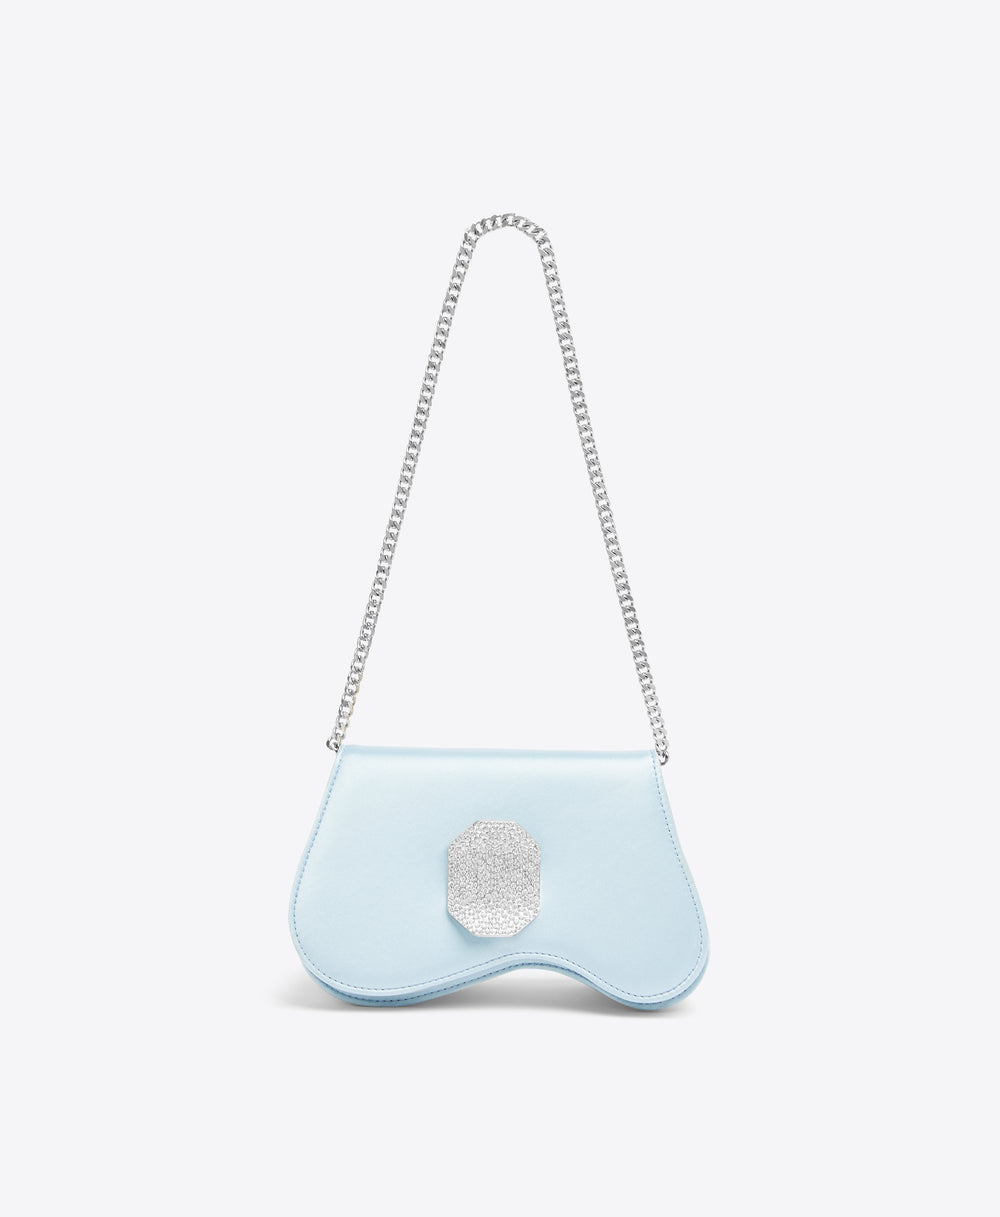 Baby Blue Asymmetric Curved Satin Clutch Malone Souliers